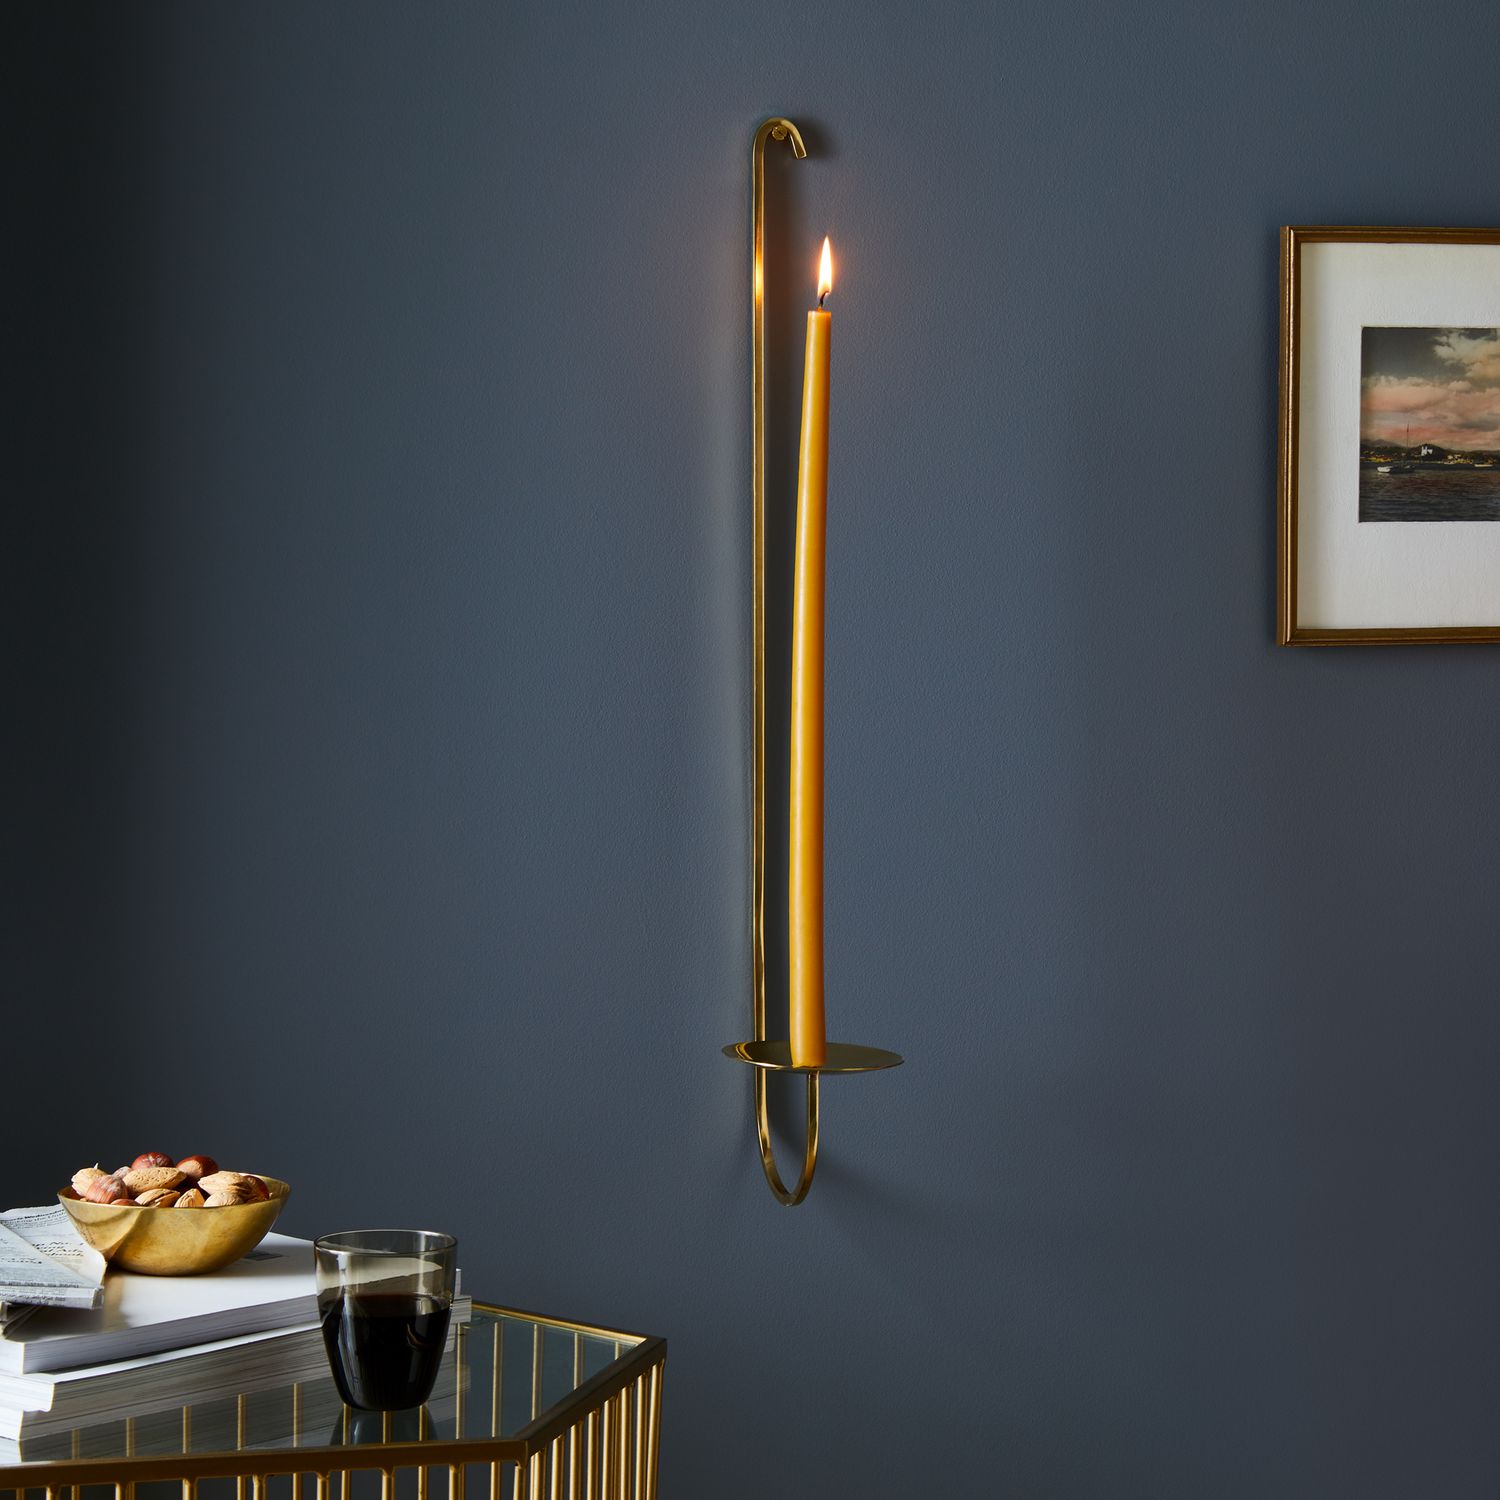 Vela Unlaquered Brass Modern Wall Sconce Taper Candle Holder + Reviews